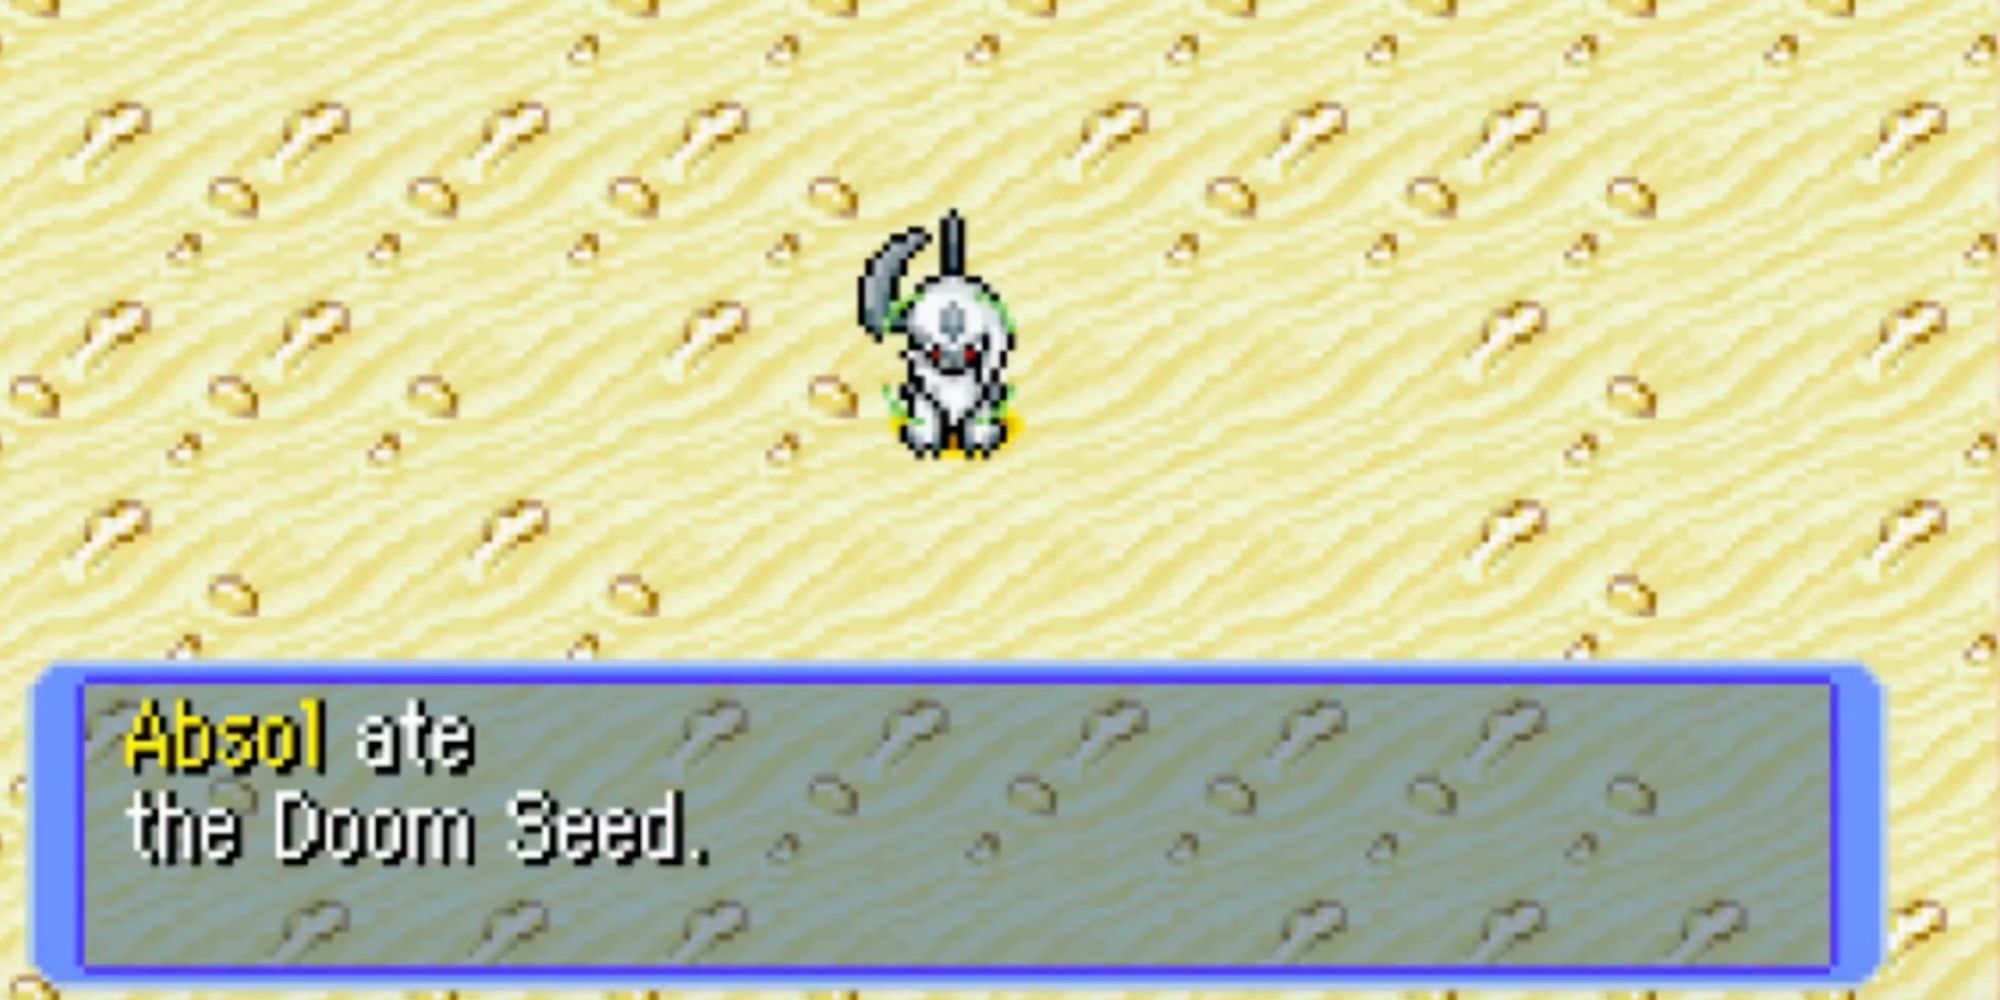 Absol from Pokemon Mystery Dungeon Featuring Doom Seed